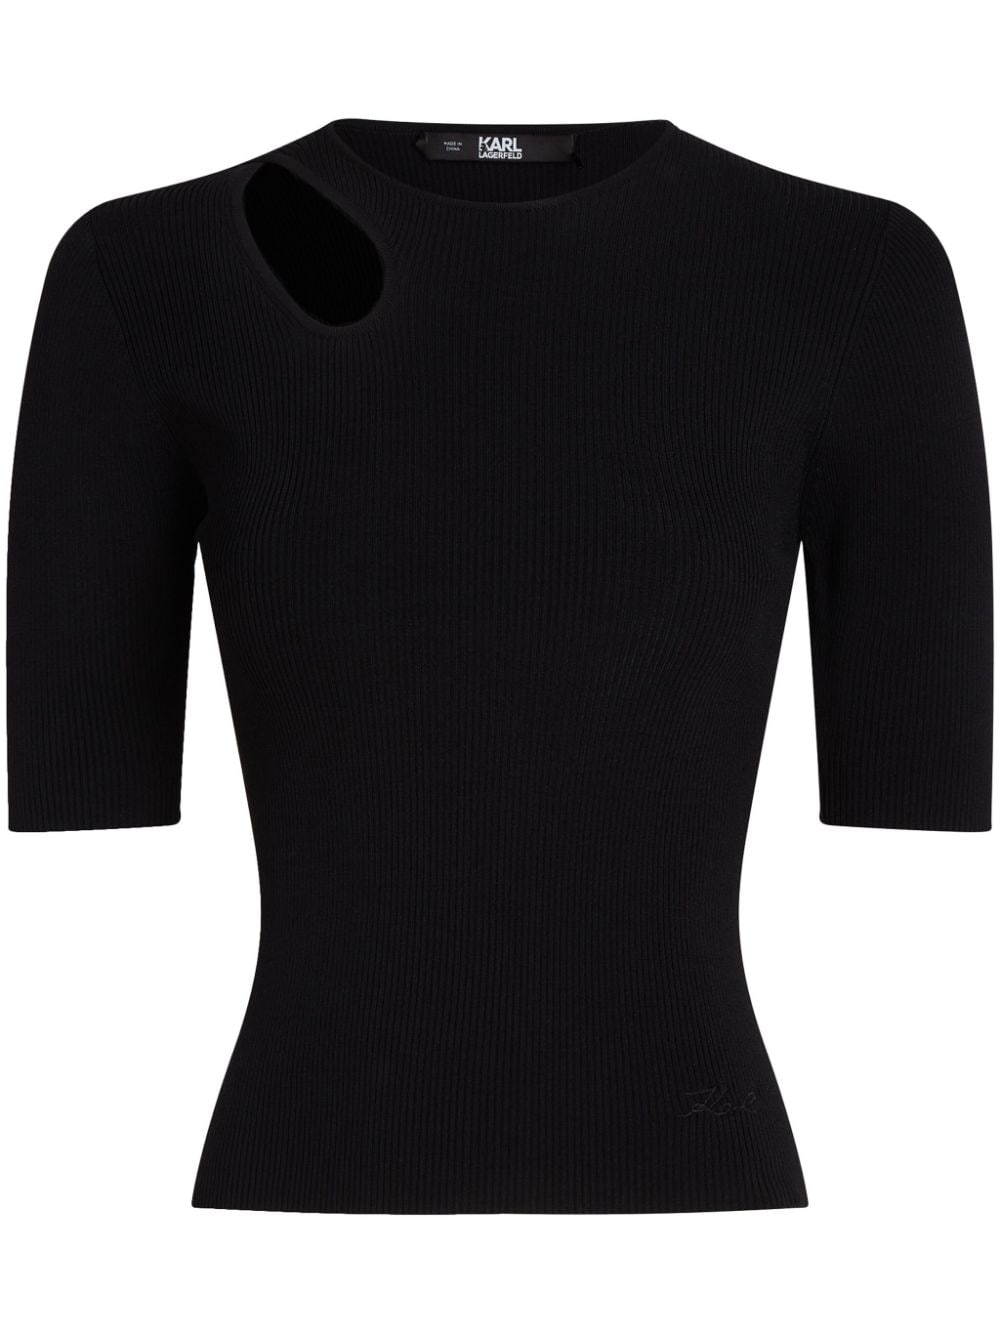 Karl Lagerfeld cut-out ribbed-knit top - Black von Karl Lagerfeld